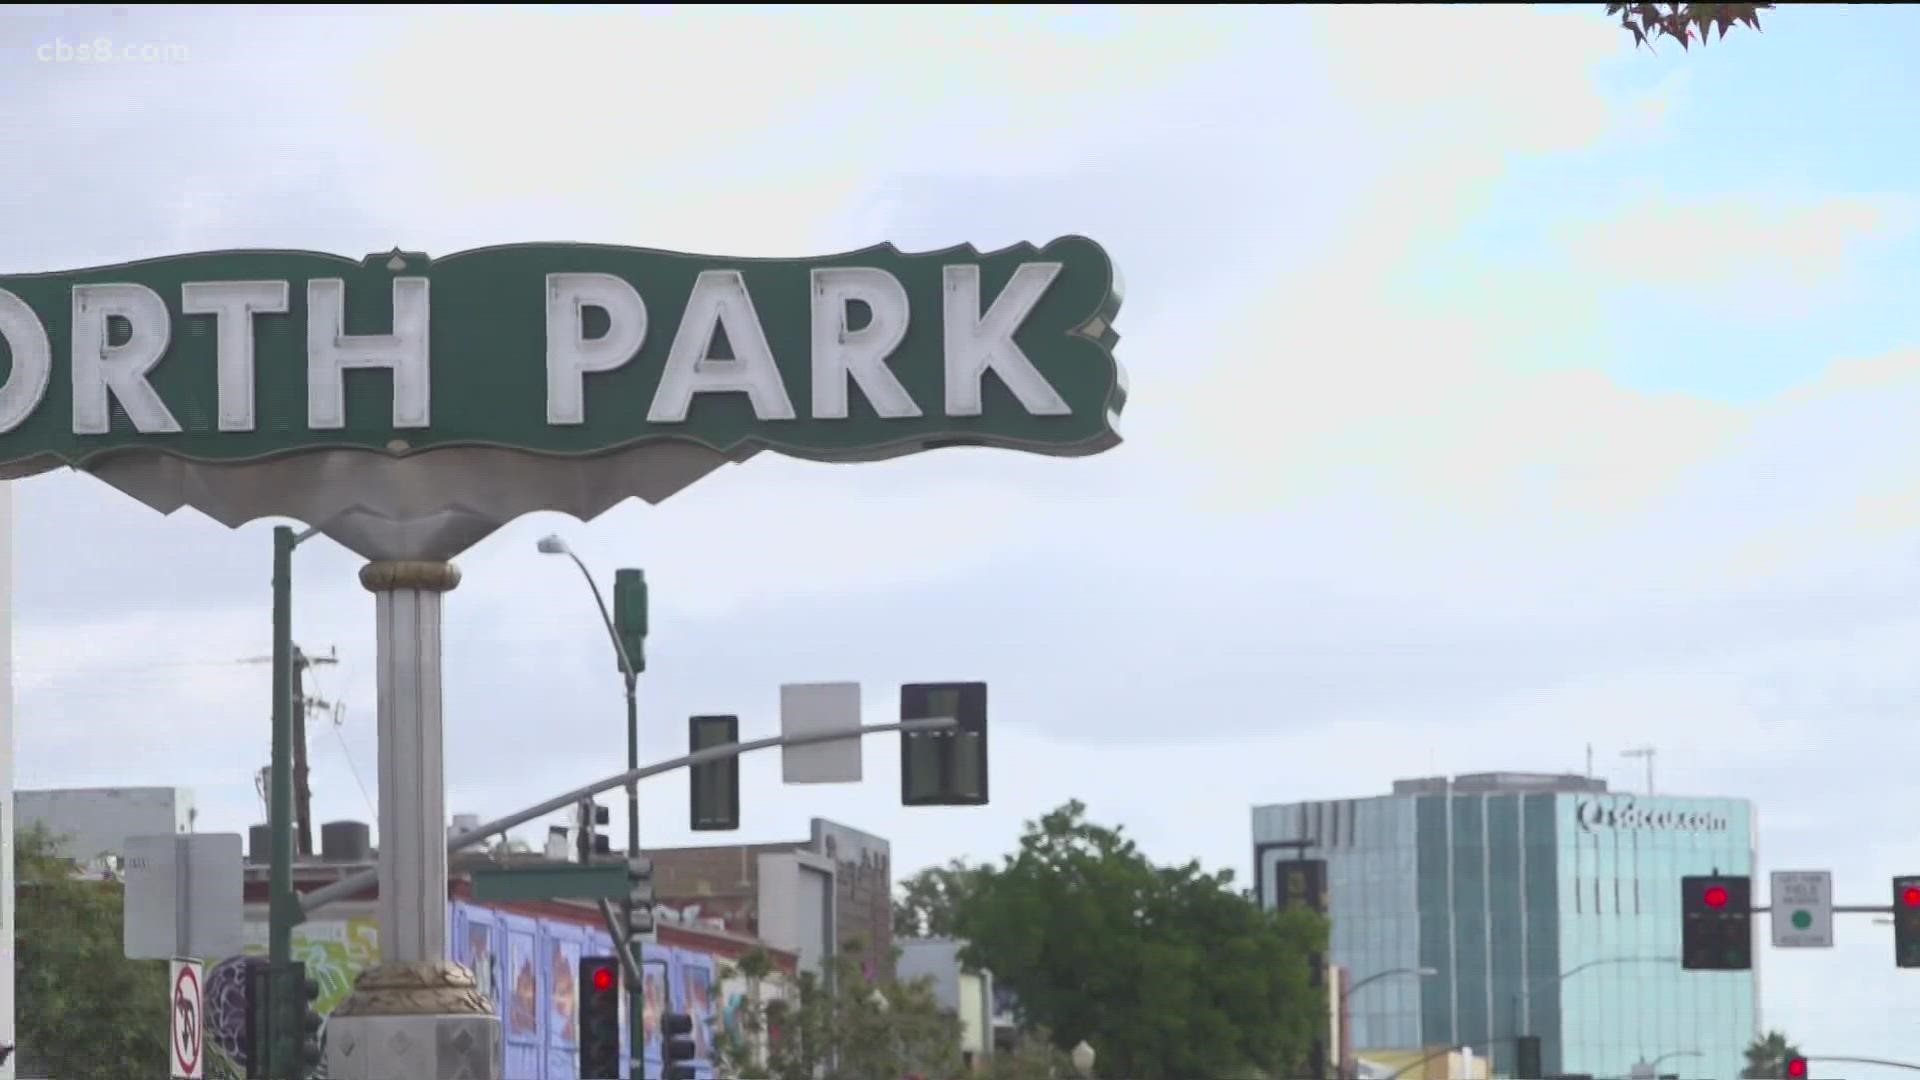 News 8 looks into the history of North Park, and what it's like today. We revisit an iconic theatre; Berger Hardware - the oldest business in the area and more.